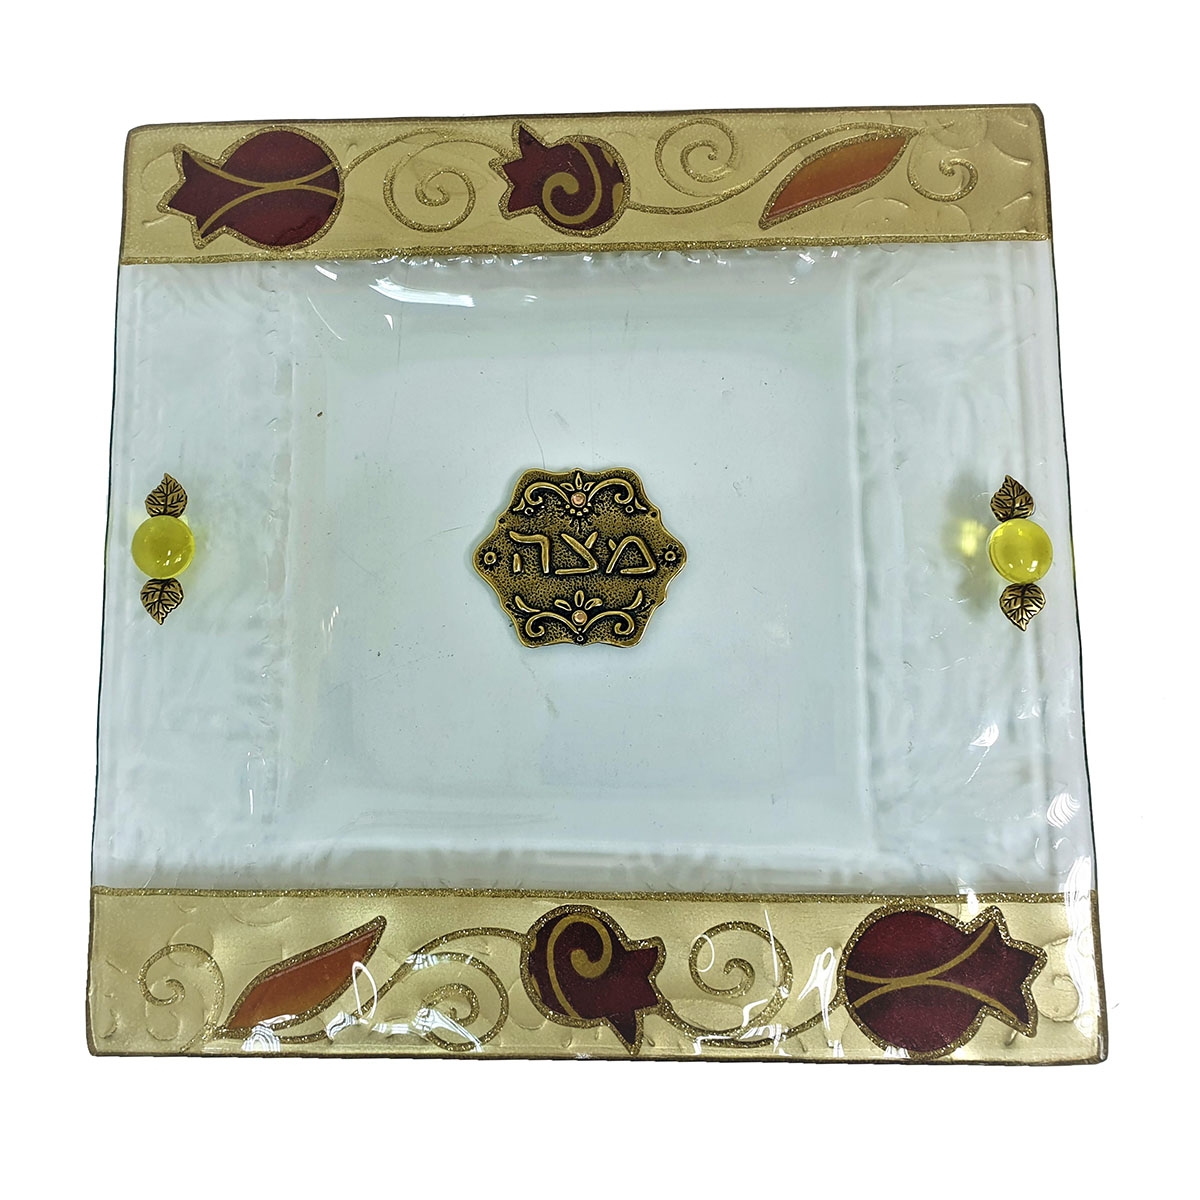 Lily Art Hand-Painted Glass Matzah Tray With Pomegranate Motif (Red and Orange) - 1